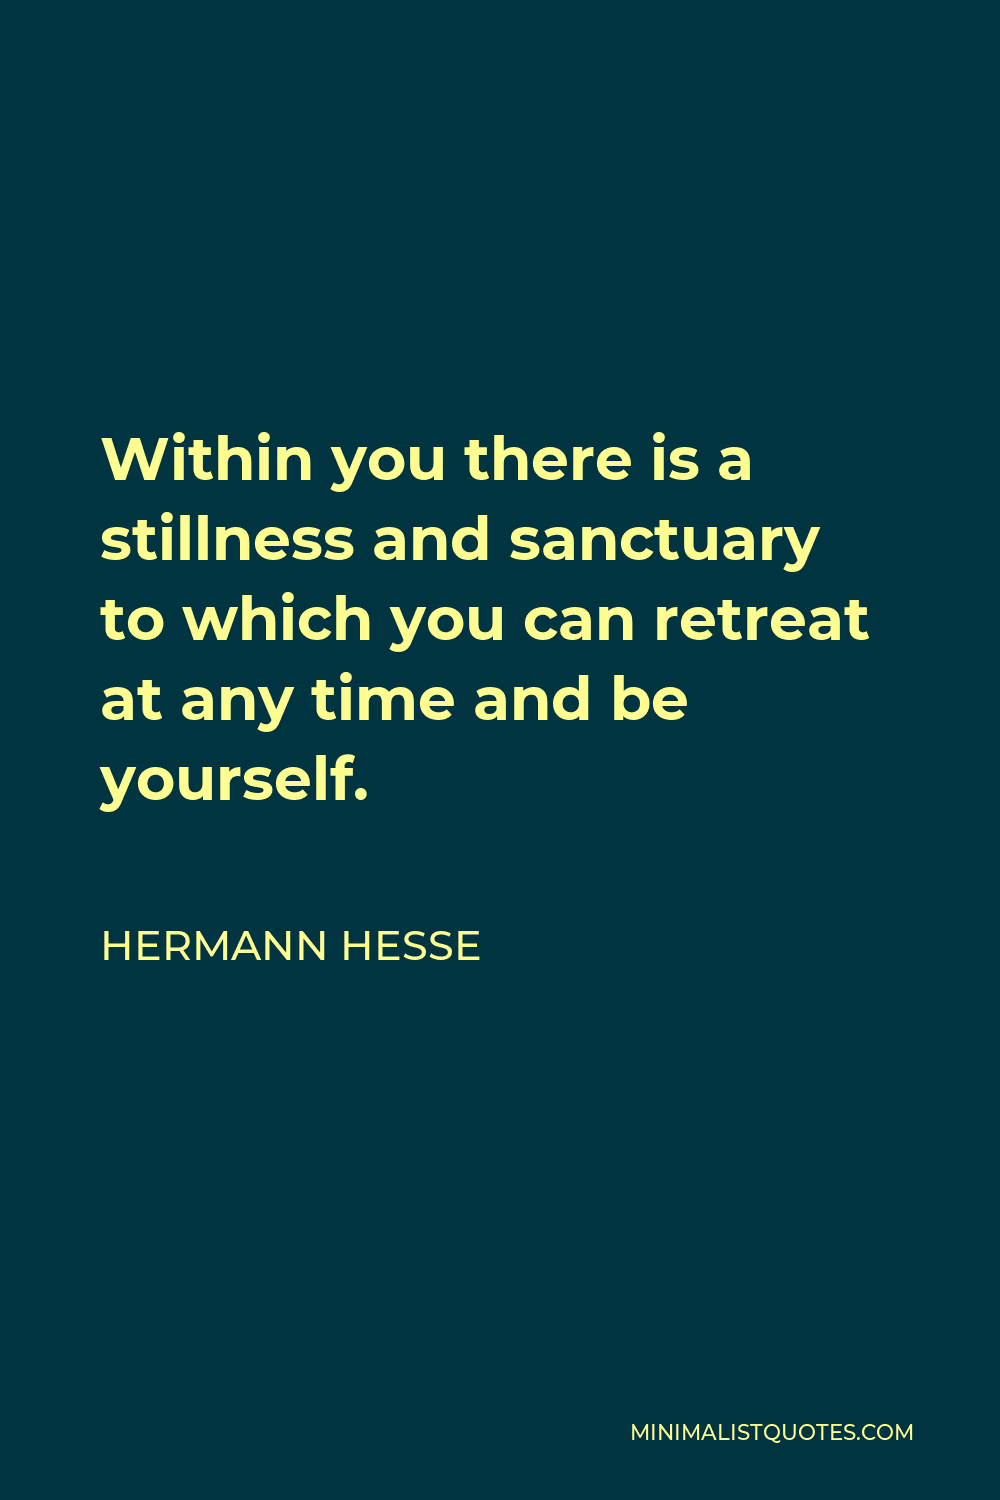 Hermann Hesse Quote - Within you there is a stillness and sanctuary to which you can retreat at any time and be yourself.